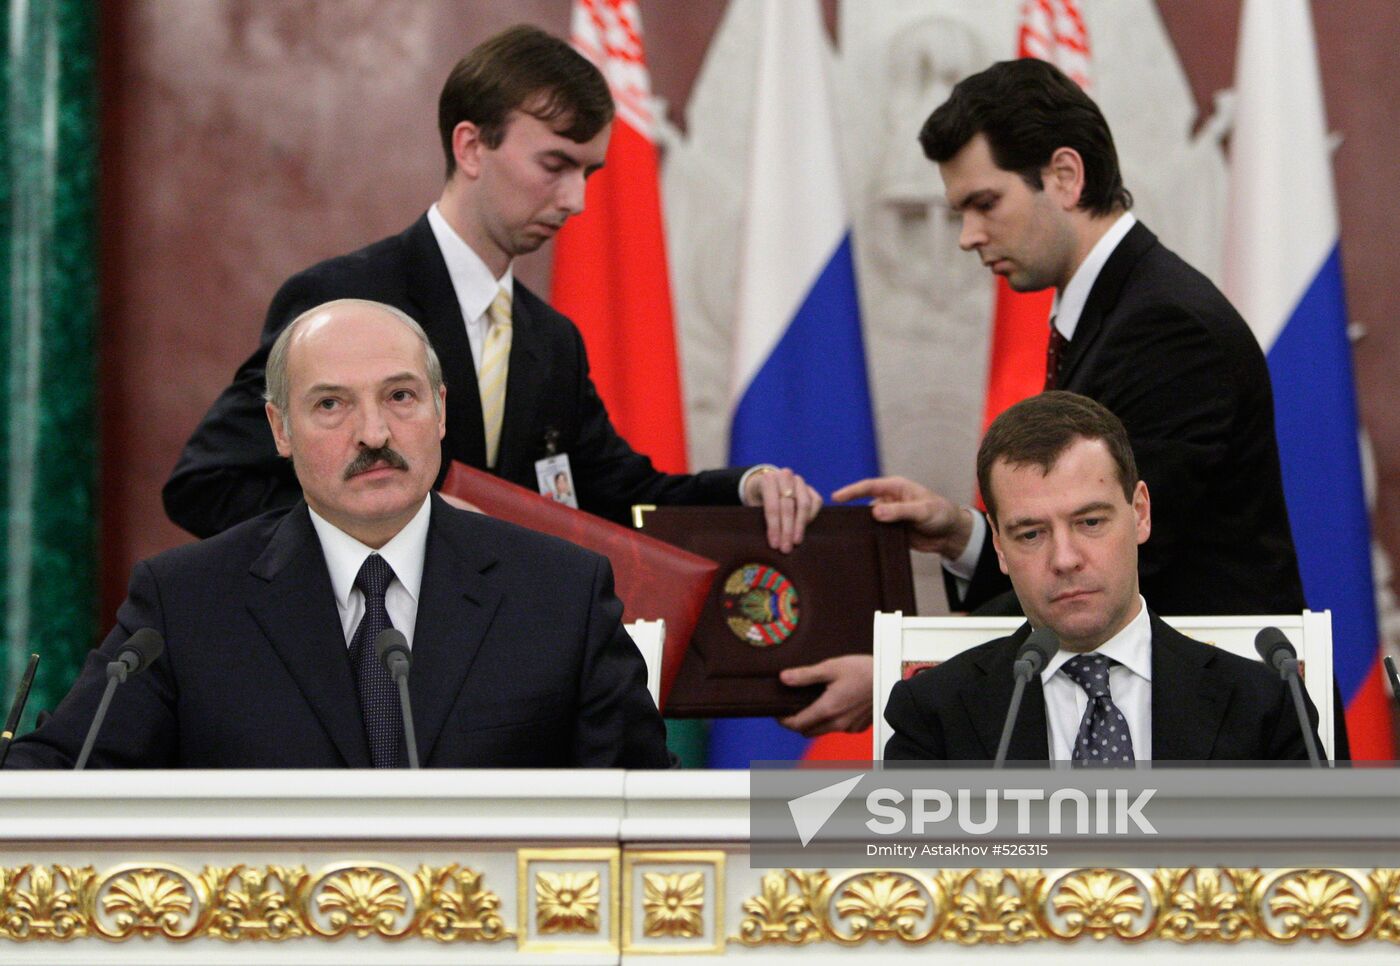 Supreme State Council of Union State meets in Kremlin